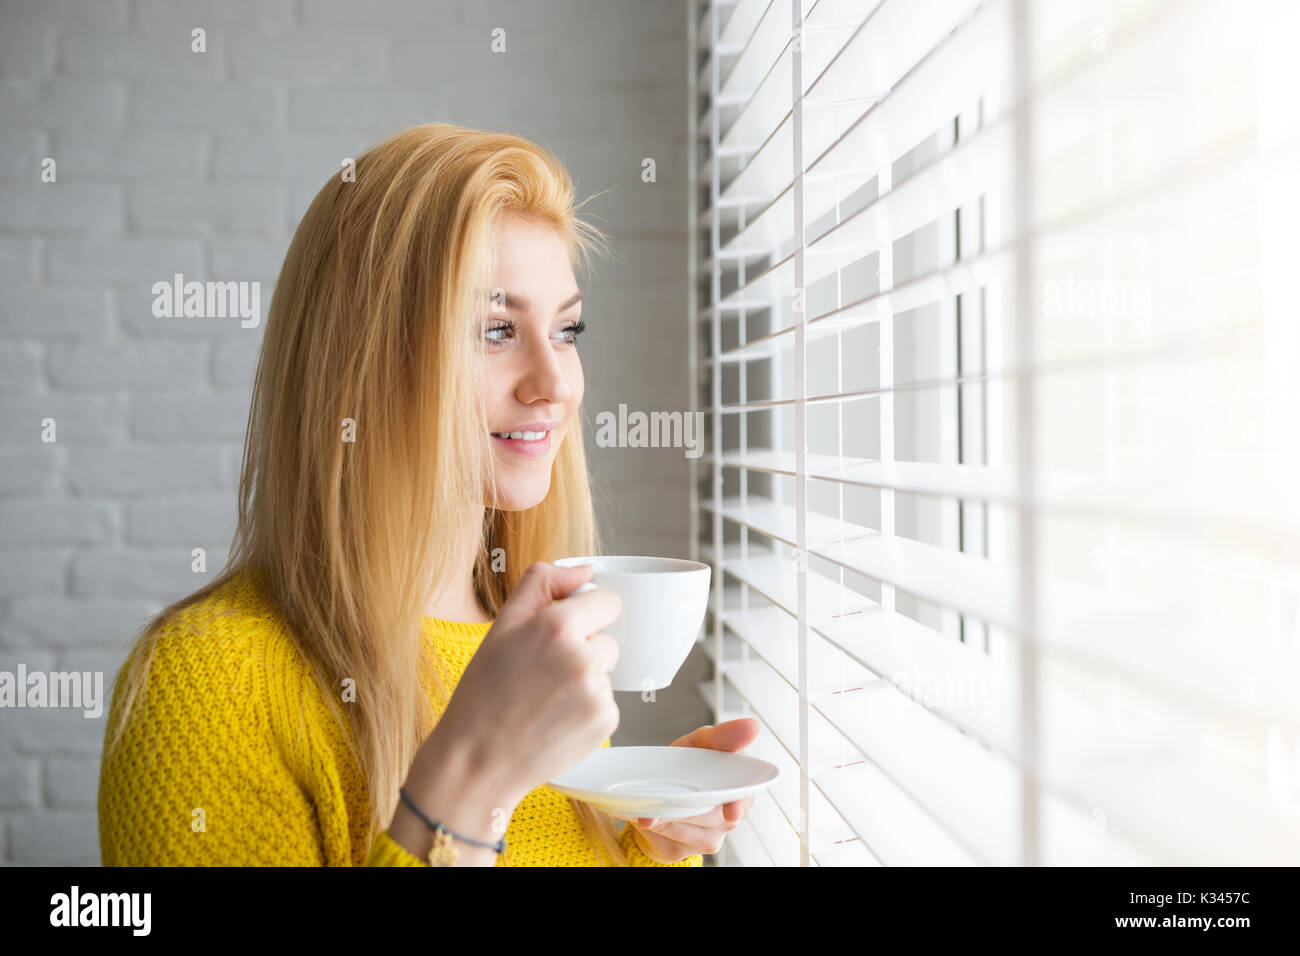 A photo of young, beautiful woman with a cup of tea. She's looking outside the window and smiling. Stock Photo